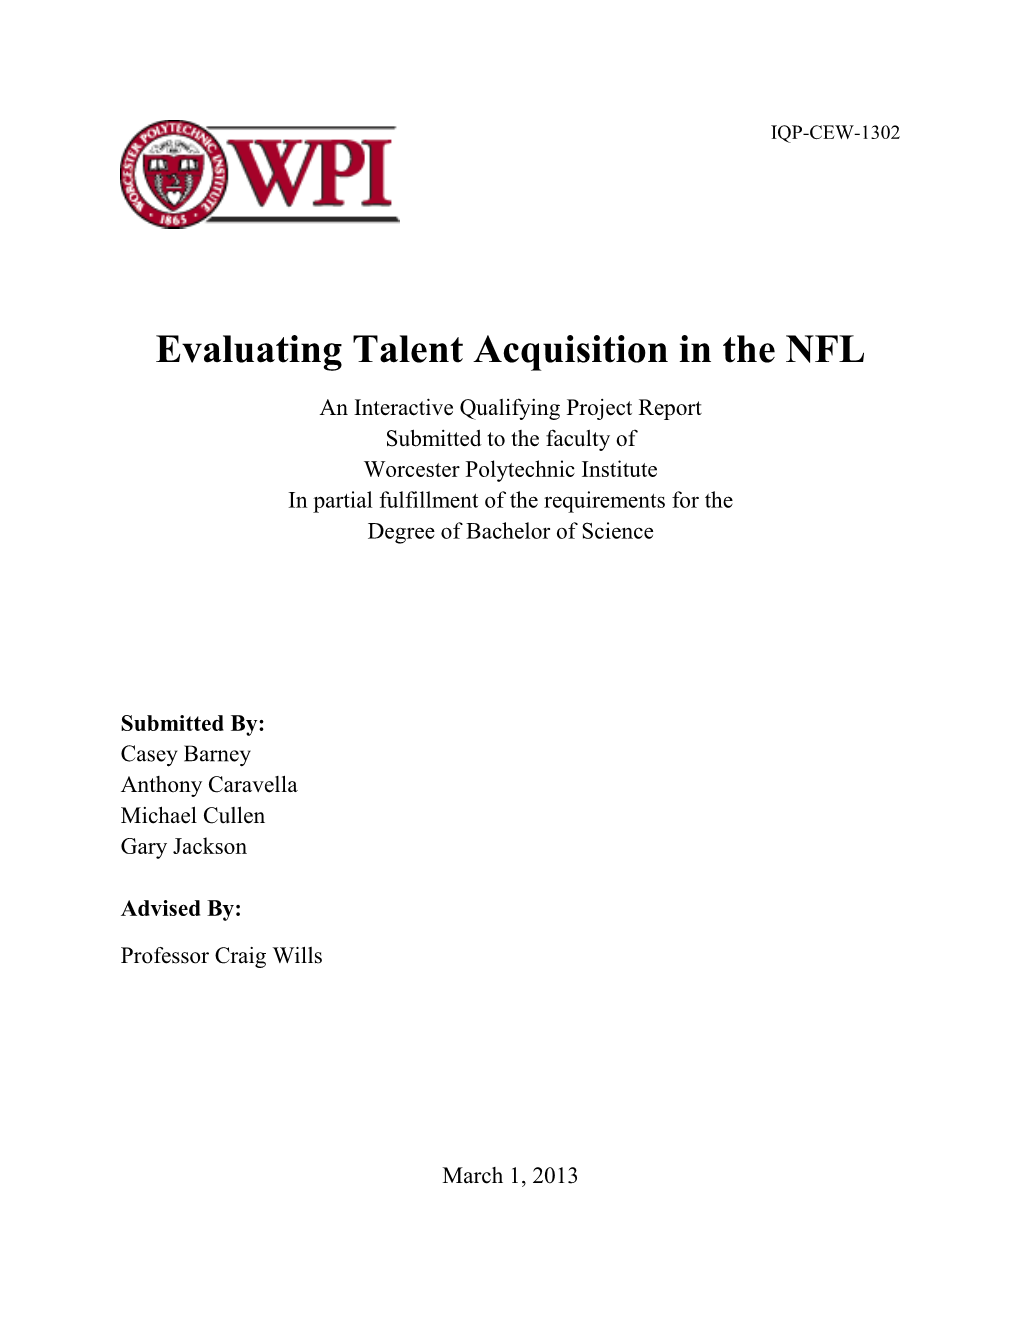 Evaluating Talent Acquisition in the NFL